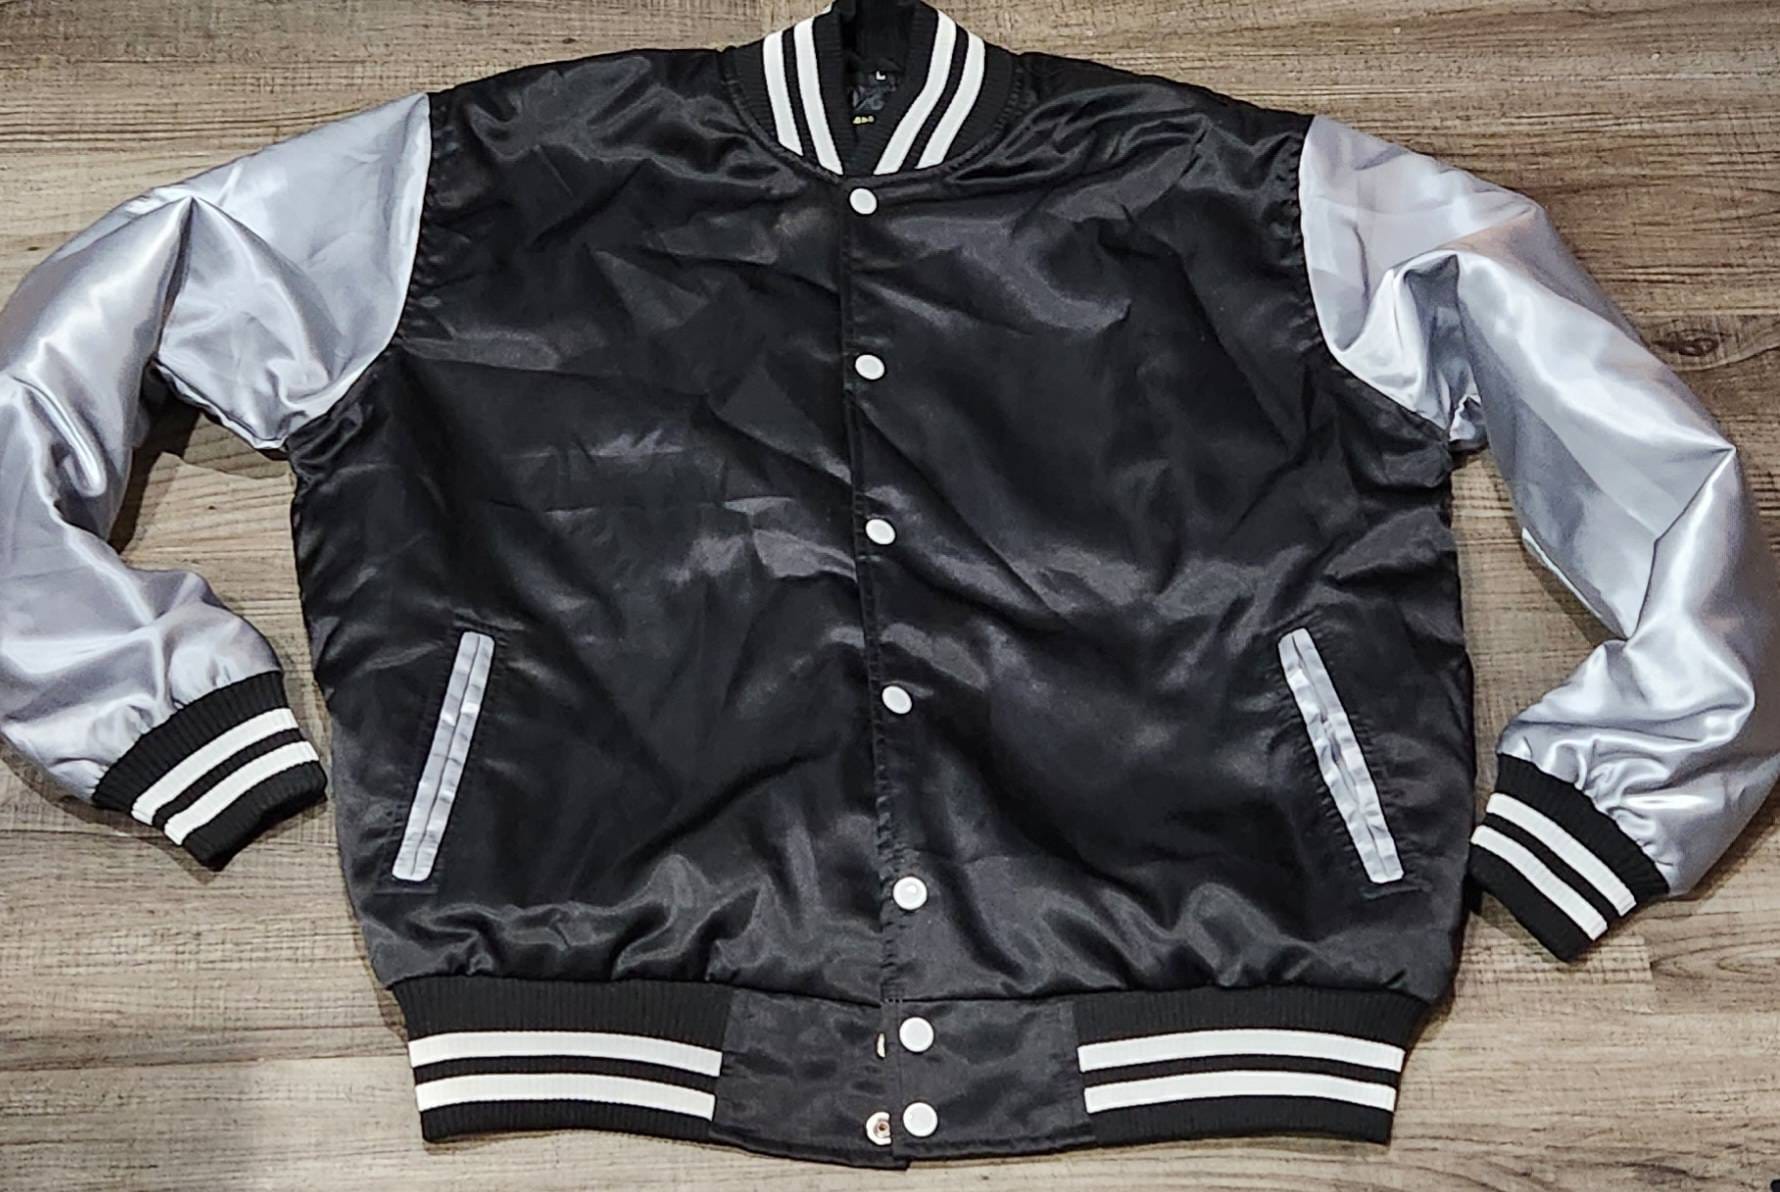 Limited Edition: Satin, Black Body, Gray Arms, White Stripes, Varsity Jacket with Ribbed Cuffs, Interior Zipper, Starter Sports Jacket